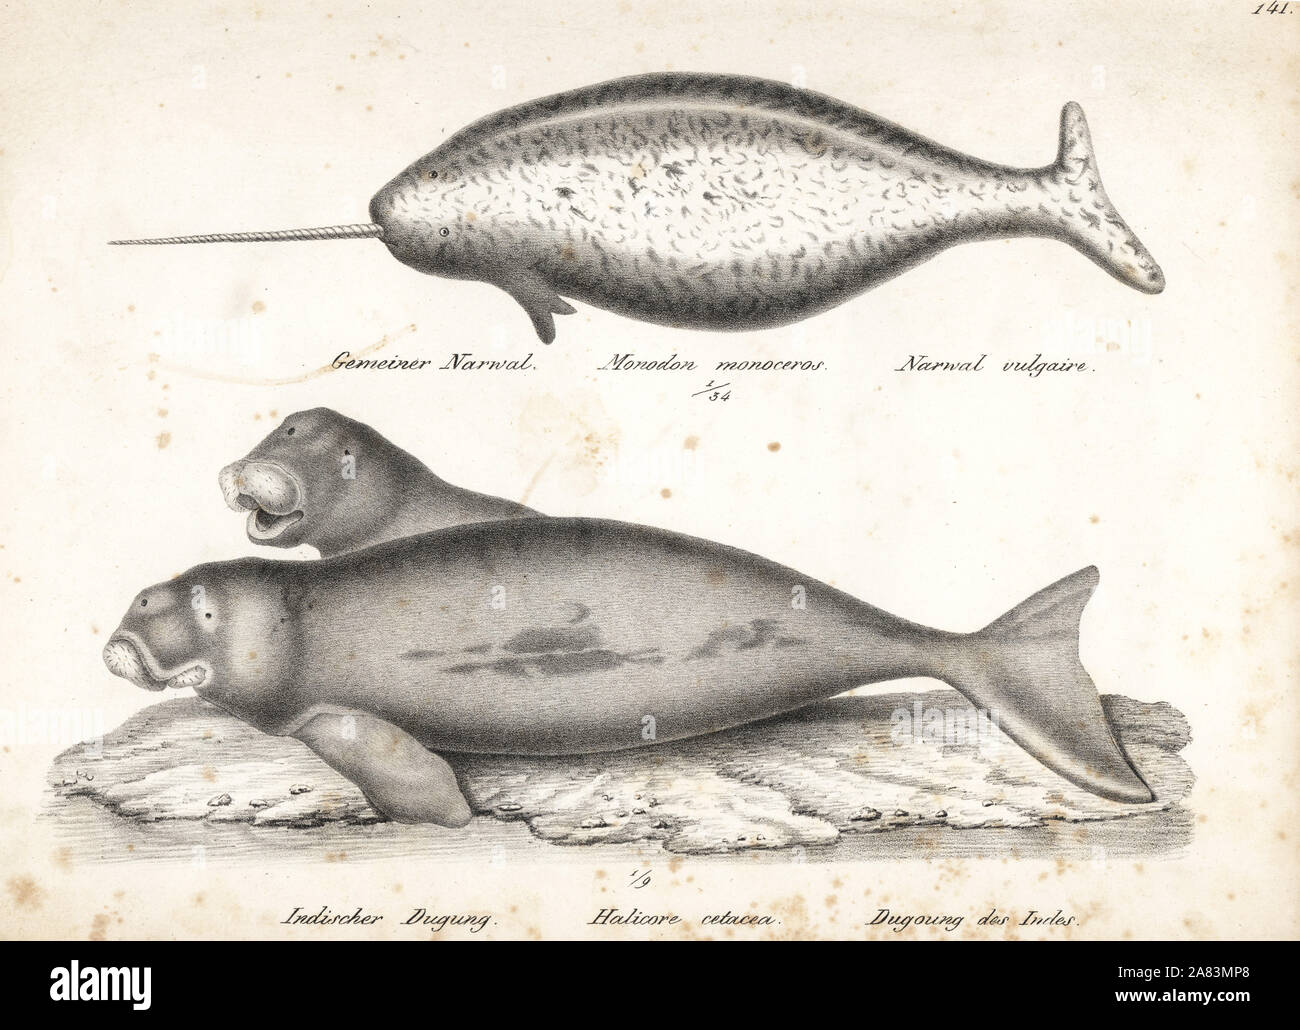 Narwhal, Monodon monoceros, and dugong, Dugong dugon (vulnerable). Lithograph by Karl Joseph Brodtmann from Heinrich Rudolf Schinz's Illustrated Natural History of Men and Animals, 1836. Stock Photo